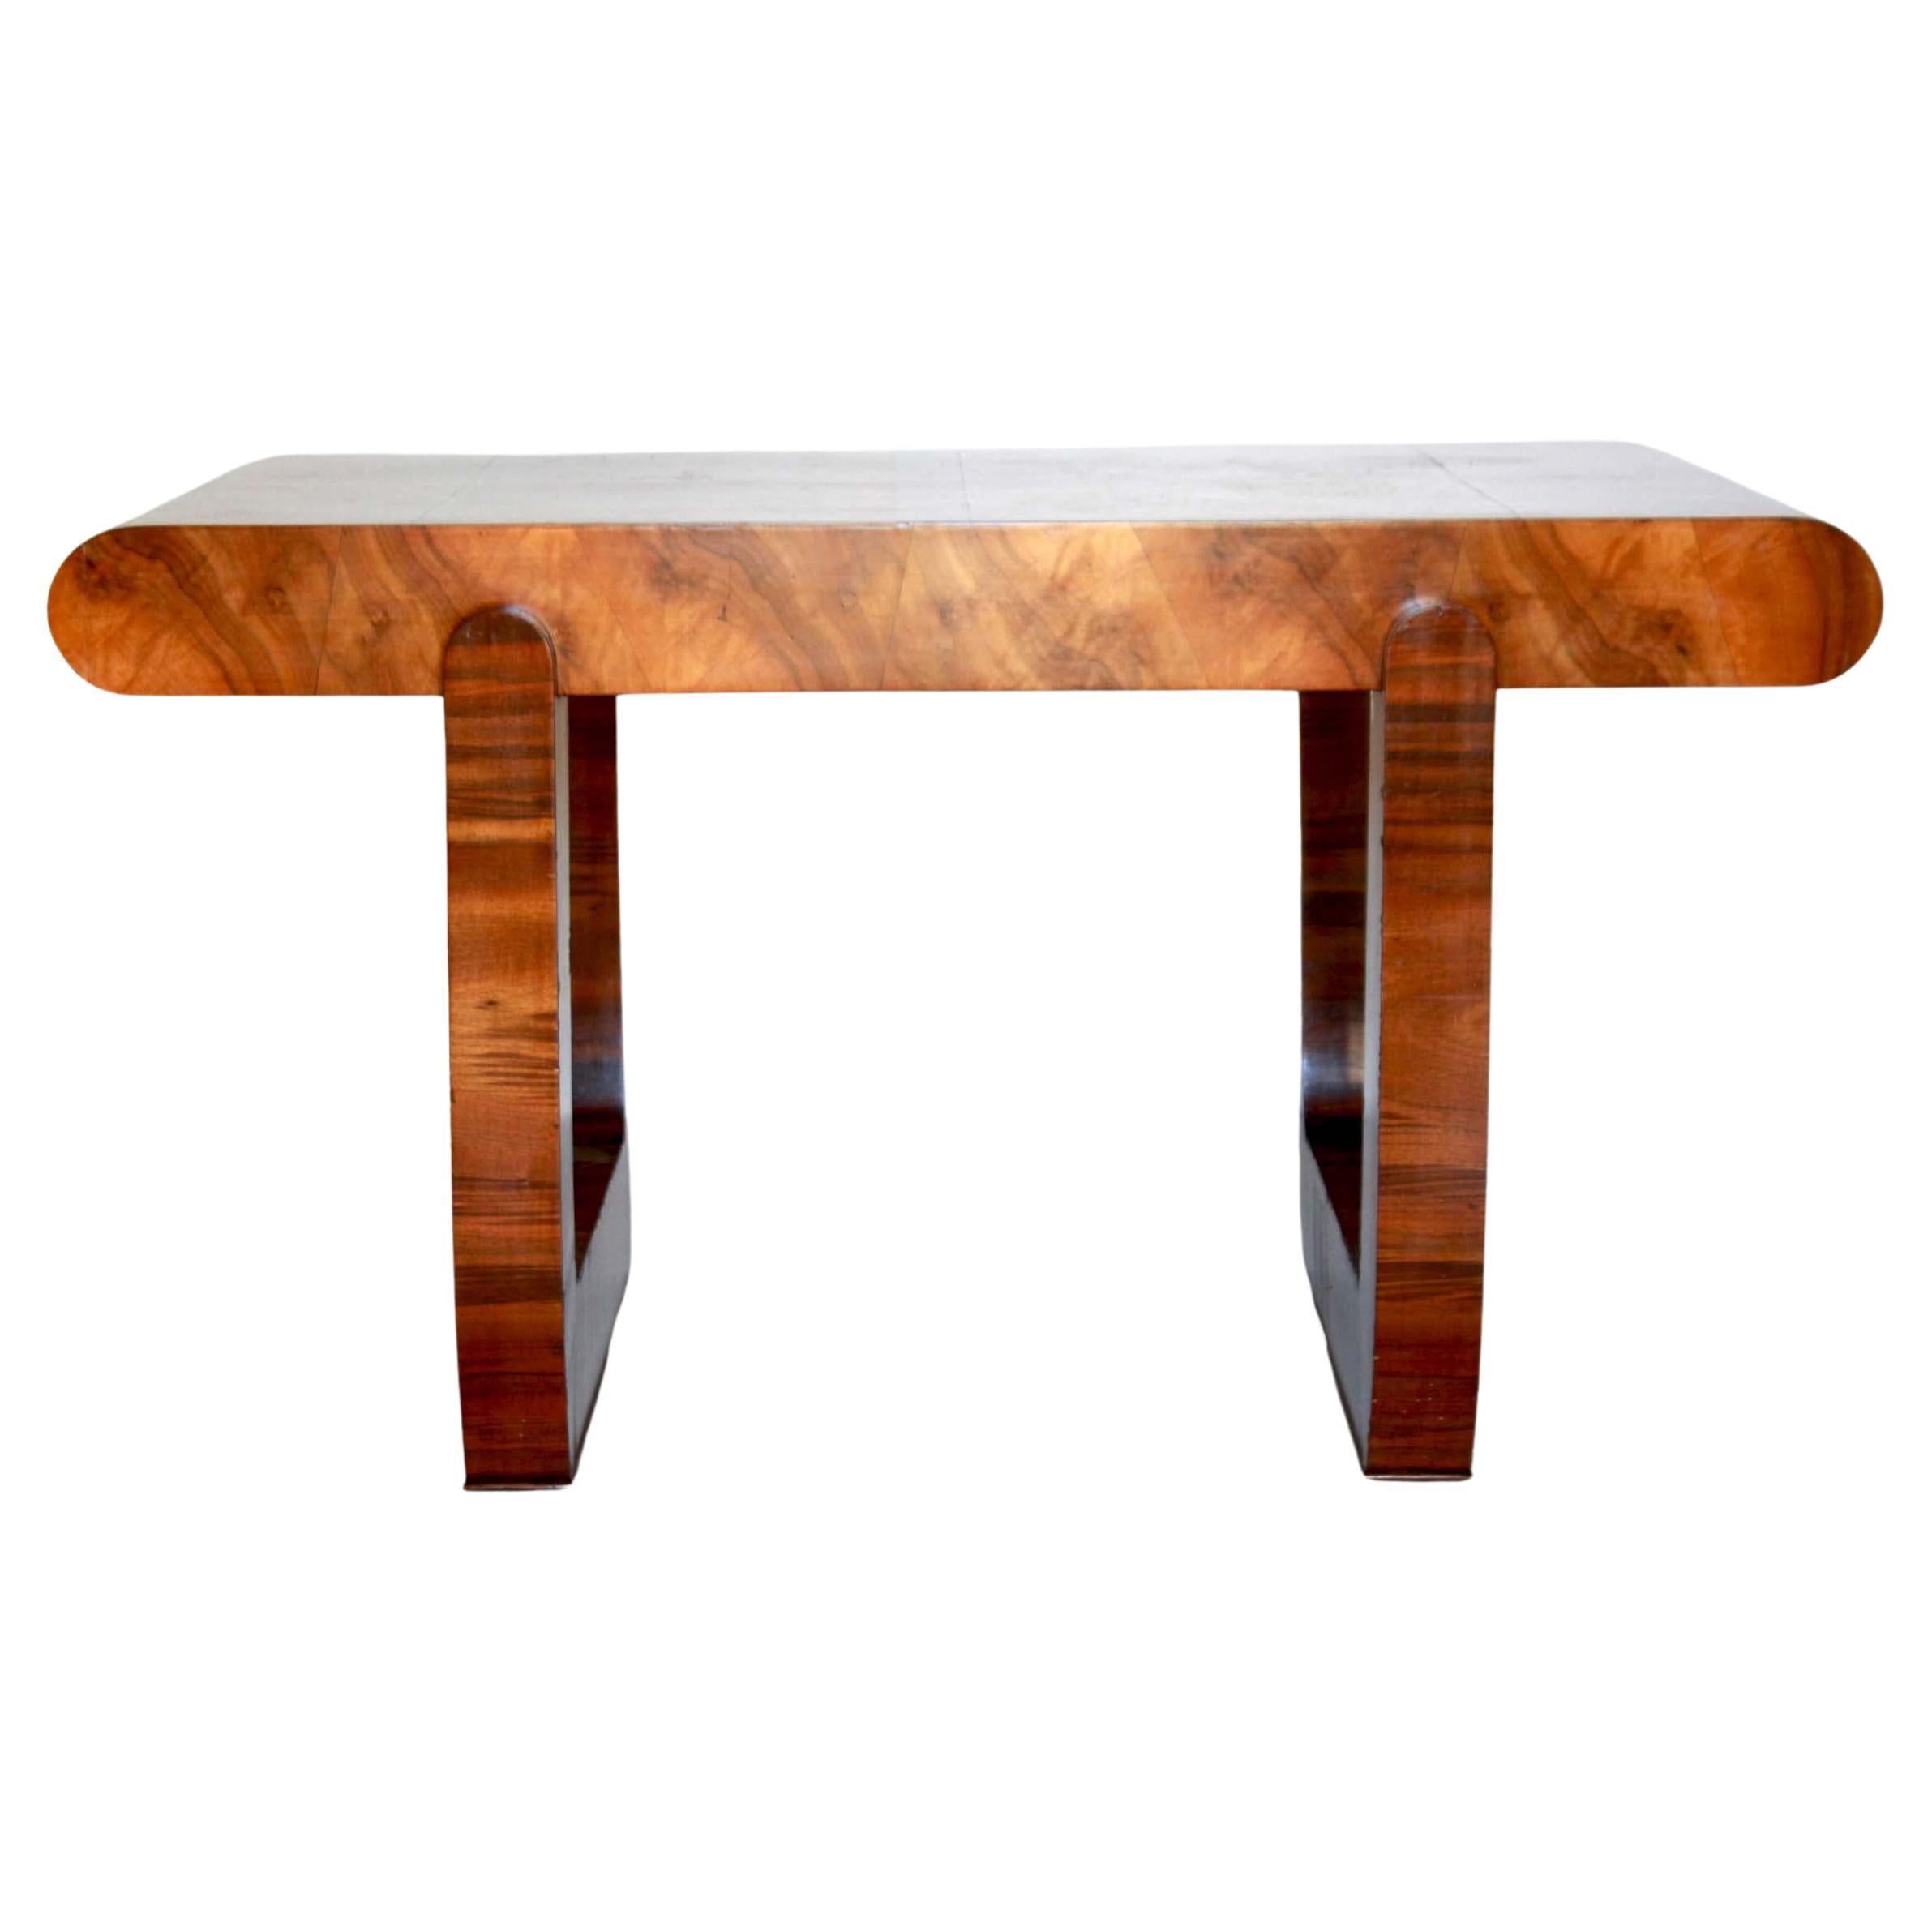 French Art Deco Briar Root Dining Table, France, 1930s For Sale